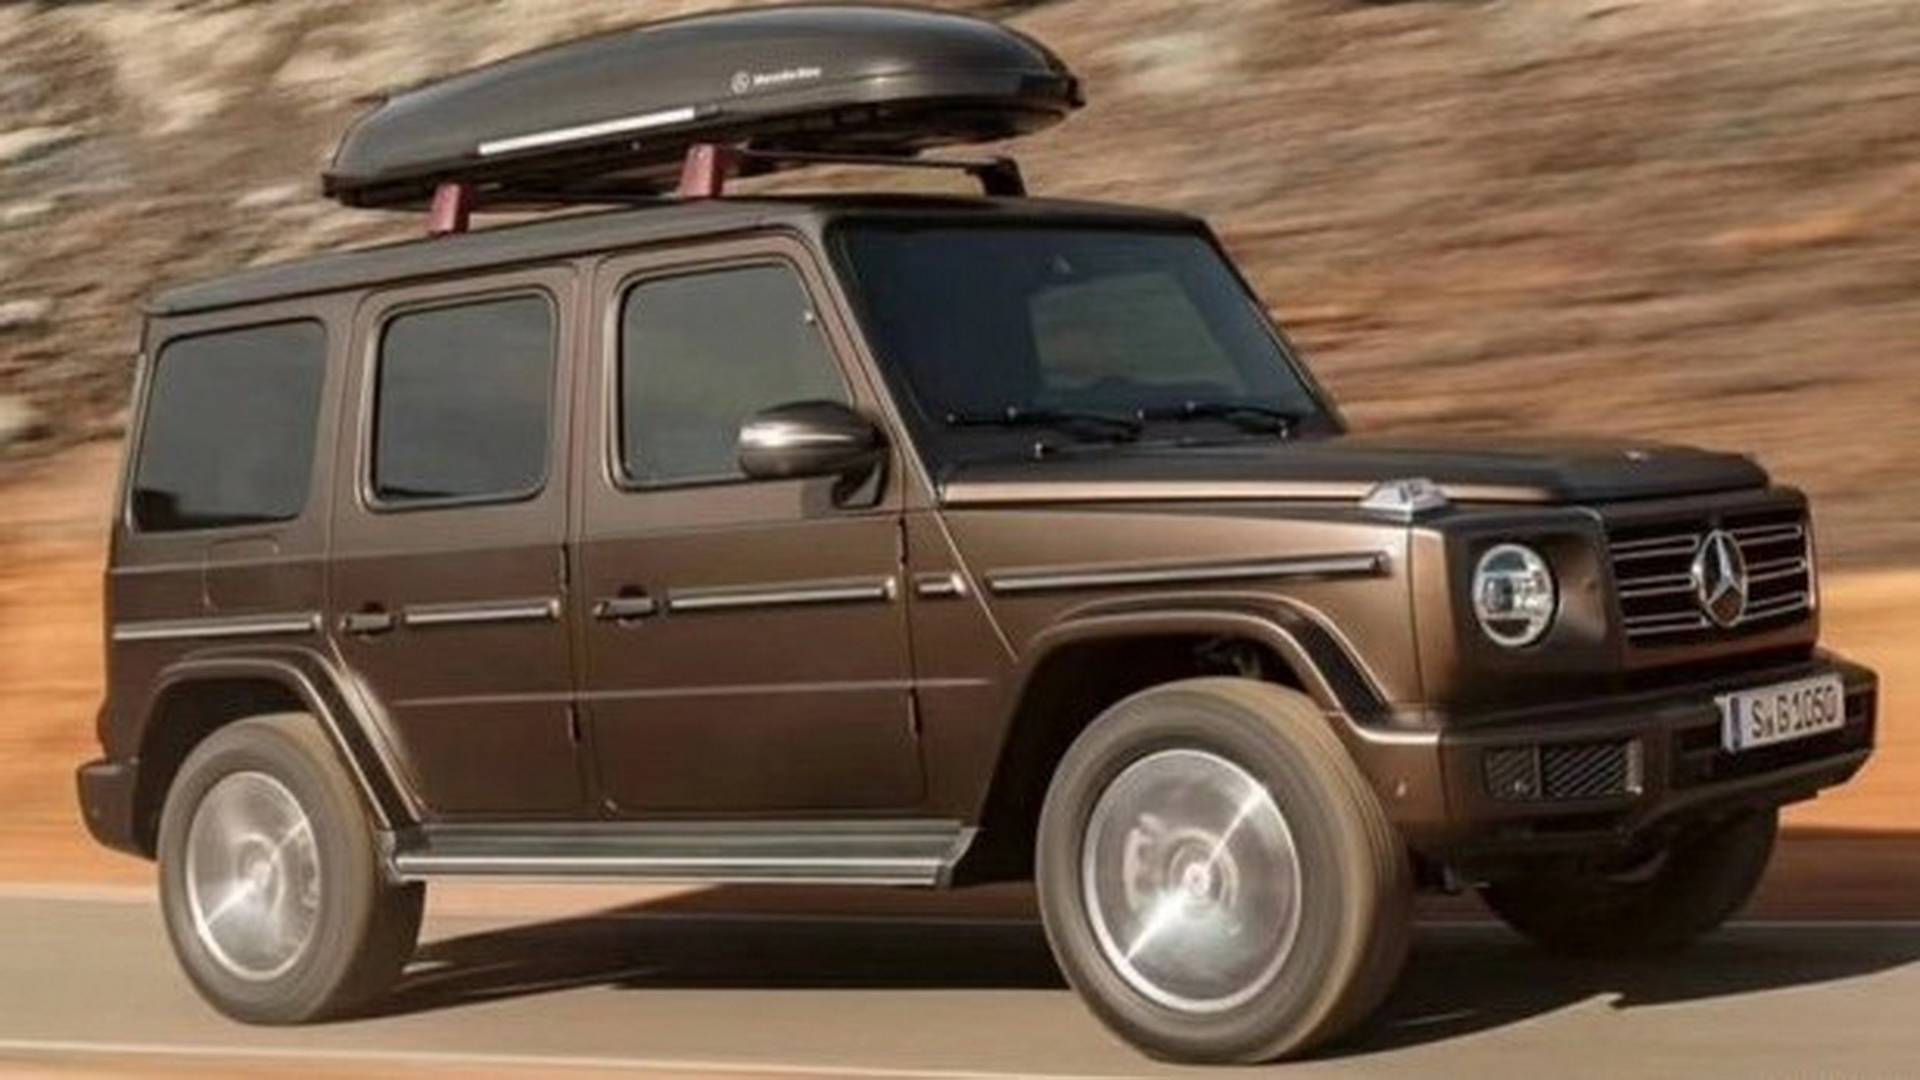 2019-mercedes-g-class-leaked-official-image.jpg